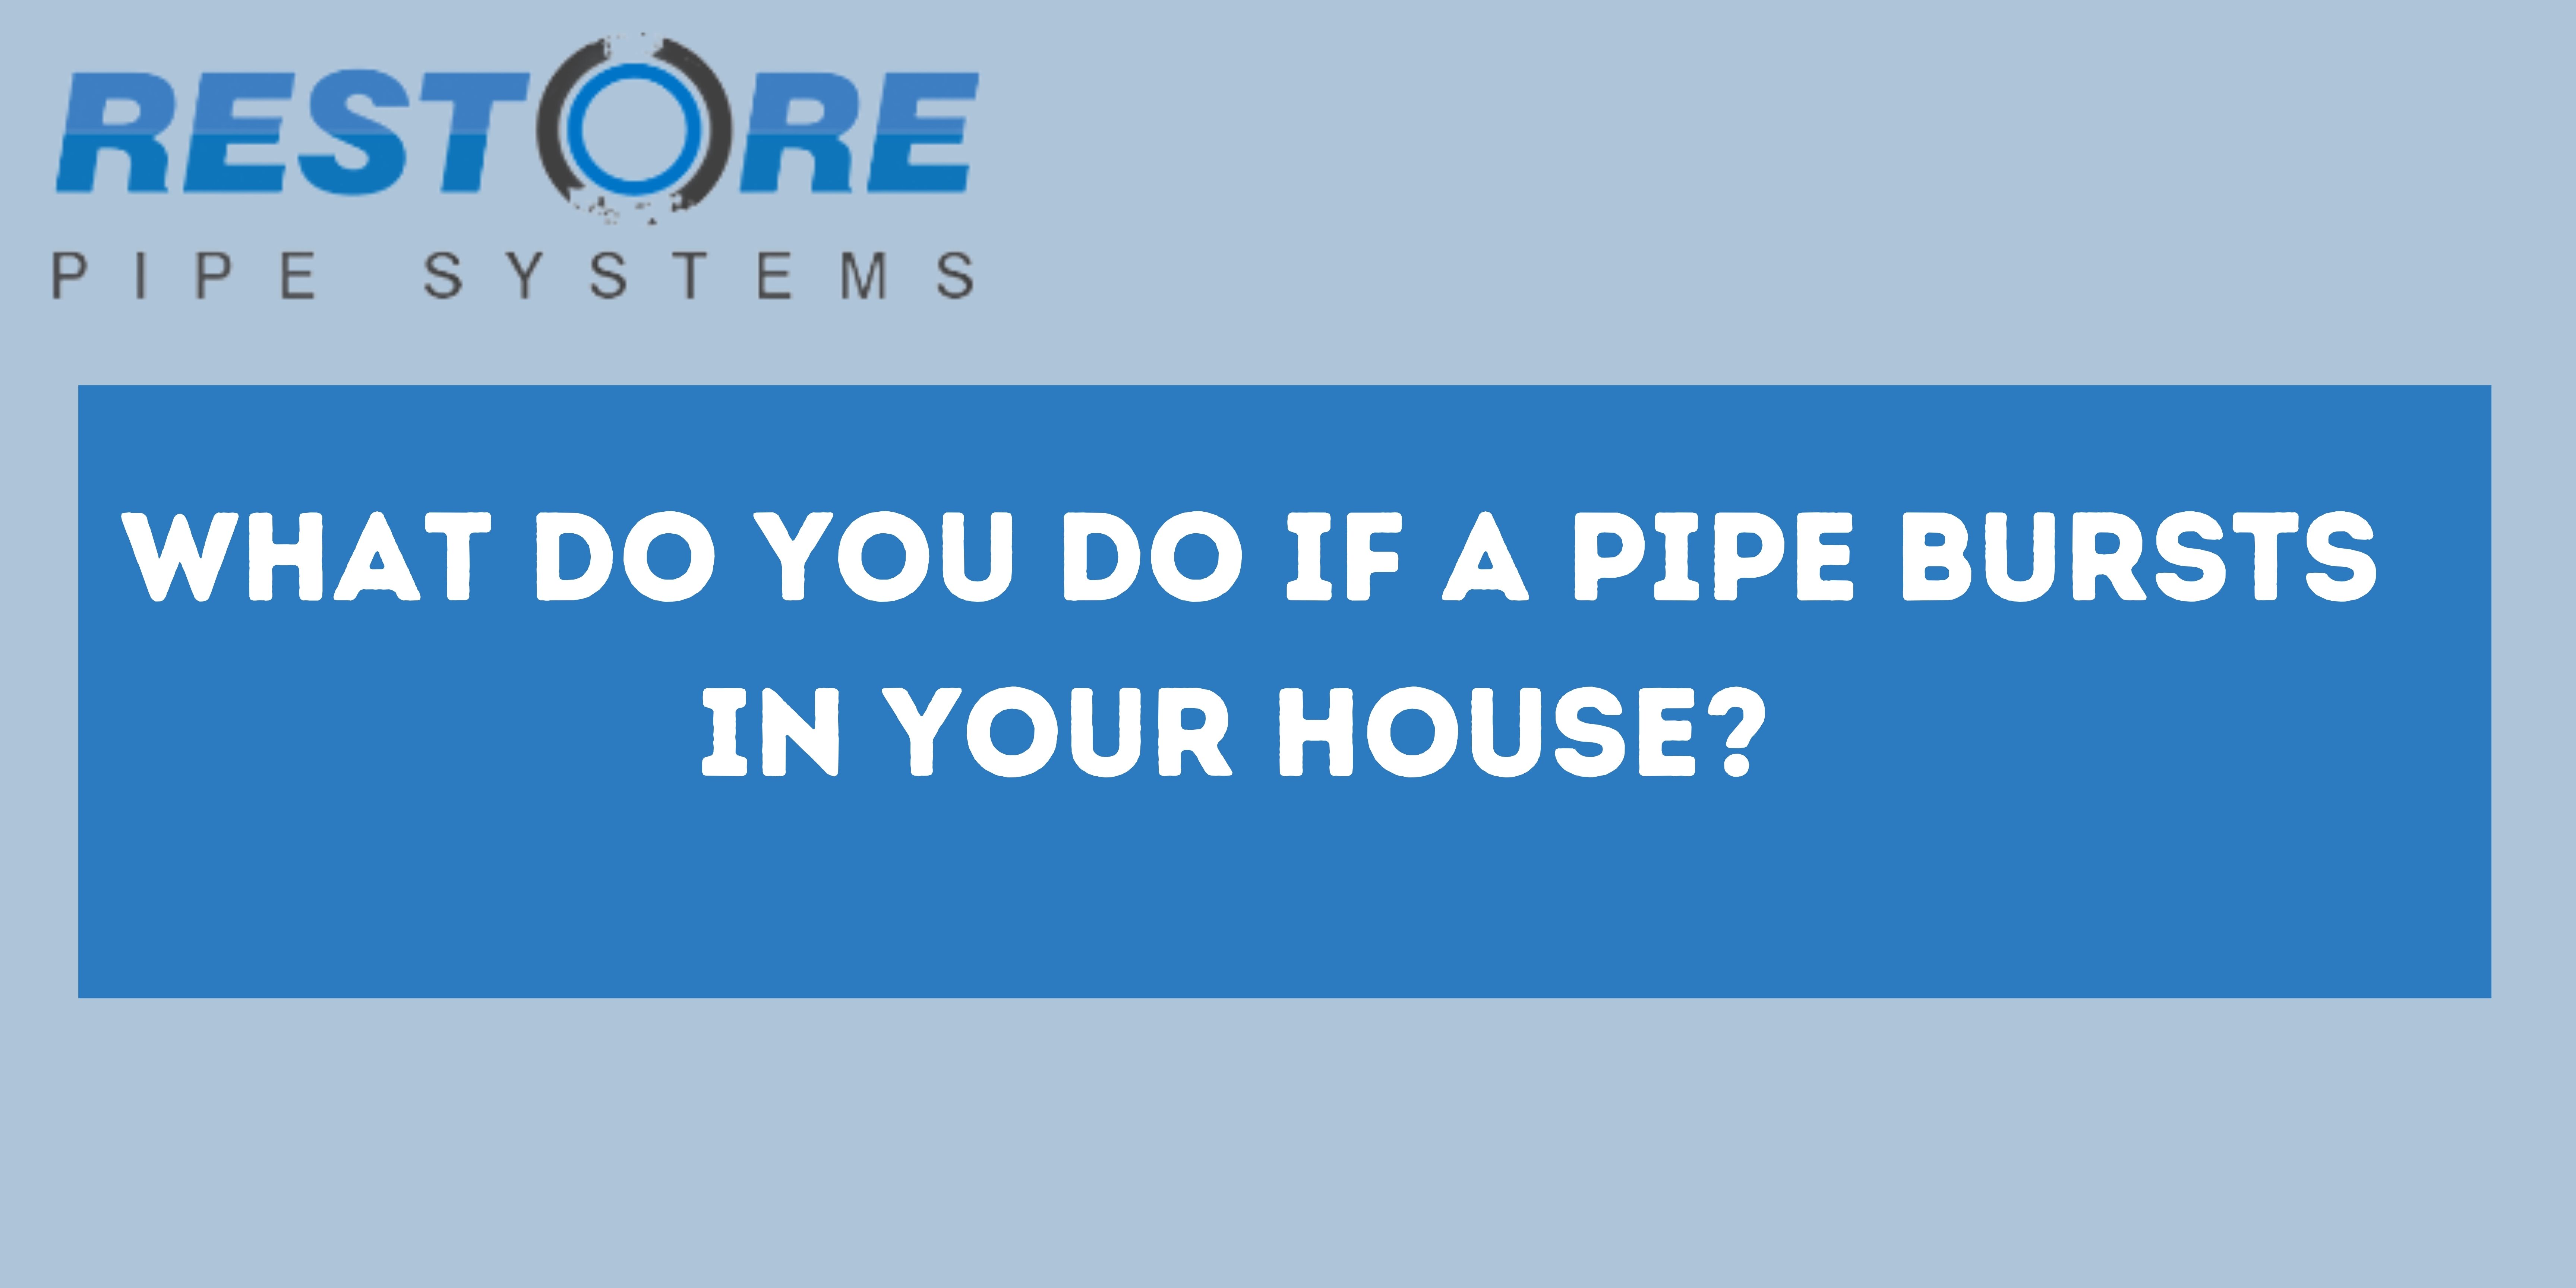 What do you do if a pipe bursts in your house?